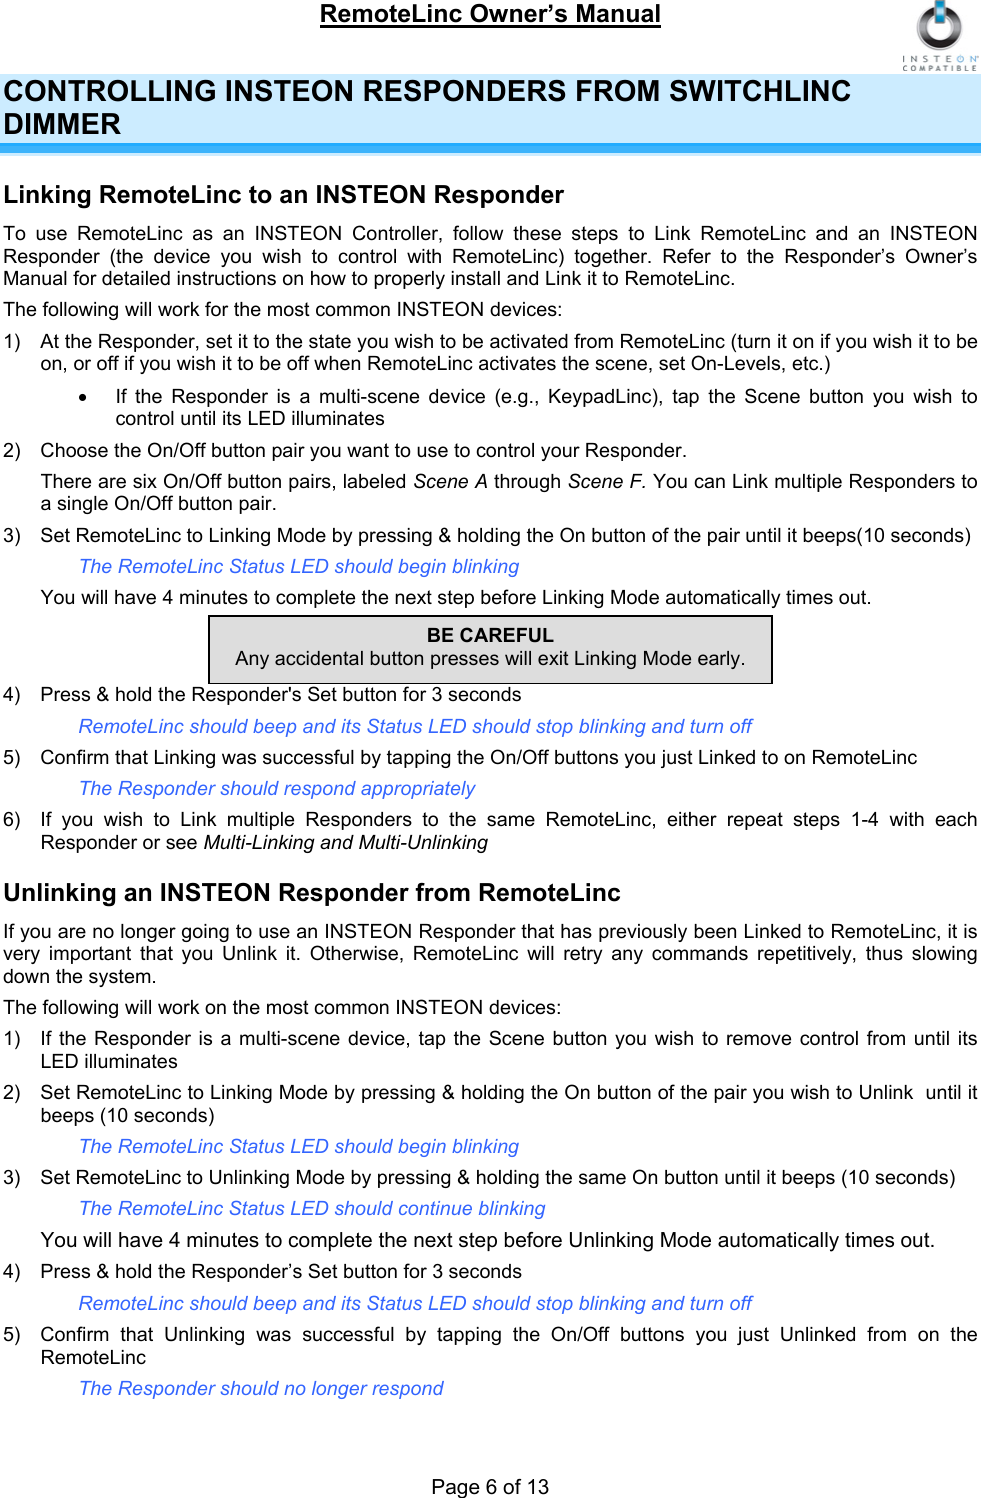 RemoteLinc Owner’s Manual  Page 6 of 13 CONTROLLING INSTEON RESPONDERS FROM SWITCHLINC DIMMER Linking RemoteLinc to an INSTEON Responder To use RemoteLinc as an INSTEON Controller, follow these steps to Link RemoteLinc and an INSTEON Responder (the device you wish to control with RemoteLinc) together. Refer to the Responder’s Owner’s Manual for detailed instructions on how to properly install and Link it to RemoteLinc.  The following will work for the most common INSTEON devices: 1)  At the Responder, set it to the state you wish to be activated from RemoteLinc (turn it on if you wish it to be on, or off if you wish it to be off when RemoteLinc activates the scene, set On-Levels, etc.) •  If the Responder is a multi-scene device (e.g., KeypadLinc), tap the Scene button you wish to control until its LED illuminates  2)  Choose the On/Off button pair you want to use to control your Responder.  There are six On/Off button pairs, labeled Scene A through Scene F. You can Link multiple Responders to a single On/Off button pair.  3)  Set RemoteLinc to Linking Mode by pressing &amp; holding the On button of the pair until it beeps(10 seconds) The RemoteLinc Status LED should begin blinking  You will have 4 minutes to complete the next step before Linking Mode automatically times out.   4)  Press &amp; hold the Responder&apos;s Set button for 3 seconds RemoteLinc should beep and its Status LED should stop blinking and turn off  BE CAREFUL Any accidental button presses will exit Linking Mode early. 5)  Confirm that Linking was successful by tapping the On/Off buttons you just Linked to on RemoteLinc  The Responder should respond appropriately 6)  If you wish to Link multiple Responders to the same RemoteLinc, either repeat steps 1-4 with each Responder or see Multi-Linking and Multi-Unlinking  Unlinking an INSTEON Responder from RemoteLinc If you are no longer going to use an INSTEON Responder that has previously been Linked to RemoteLinc, it is very important that you Unlink it. Otherwise, RemoteLinc will retry any commands repetitively, thus slowing down the system.  The following will work on the most common INSTEON devices: 1)  If the Responder is a multi-scene device, tap the Scene button you wish to remove control from until its LED illuminates  2)  Set RemoteLinc to Linking Mode by pressing &amp; holding the On button of the pair you wish to Unlink  until it beeps (10 seconds) The RemoteLinc Status LED should begin blinking 3)  Set RemoteLinc to Unlinking Mode by pressing &amp; holding the same On button until it beeps (10 seconds)  The RemoteLinc Status LED should continue blinking  You will have 4 minutes to complete the next step before Unlinking Mode automatically times out.  4)  Press &amp; hold the Responder’s Set button for 3 seconds RemoteLinc should beep and its Status LED should stop blinking and turn off  5)  Confirm that Unlinking was successful by tapping the On/Off buttons you just Unlinked from on the RemoteLinc  The Responder should no longer respond 